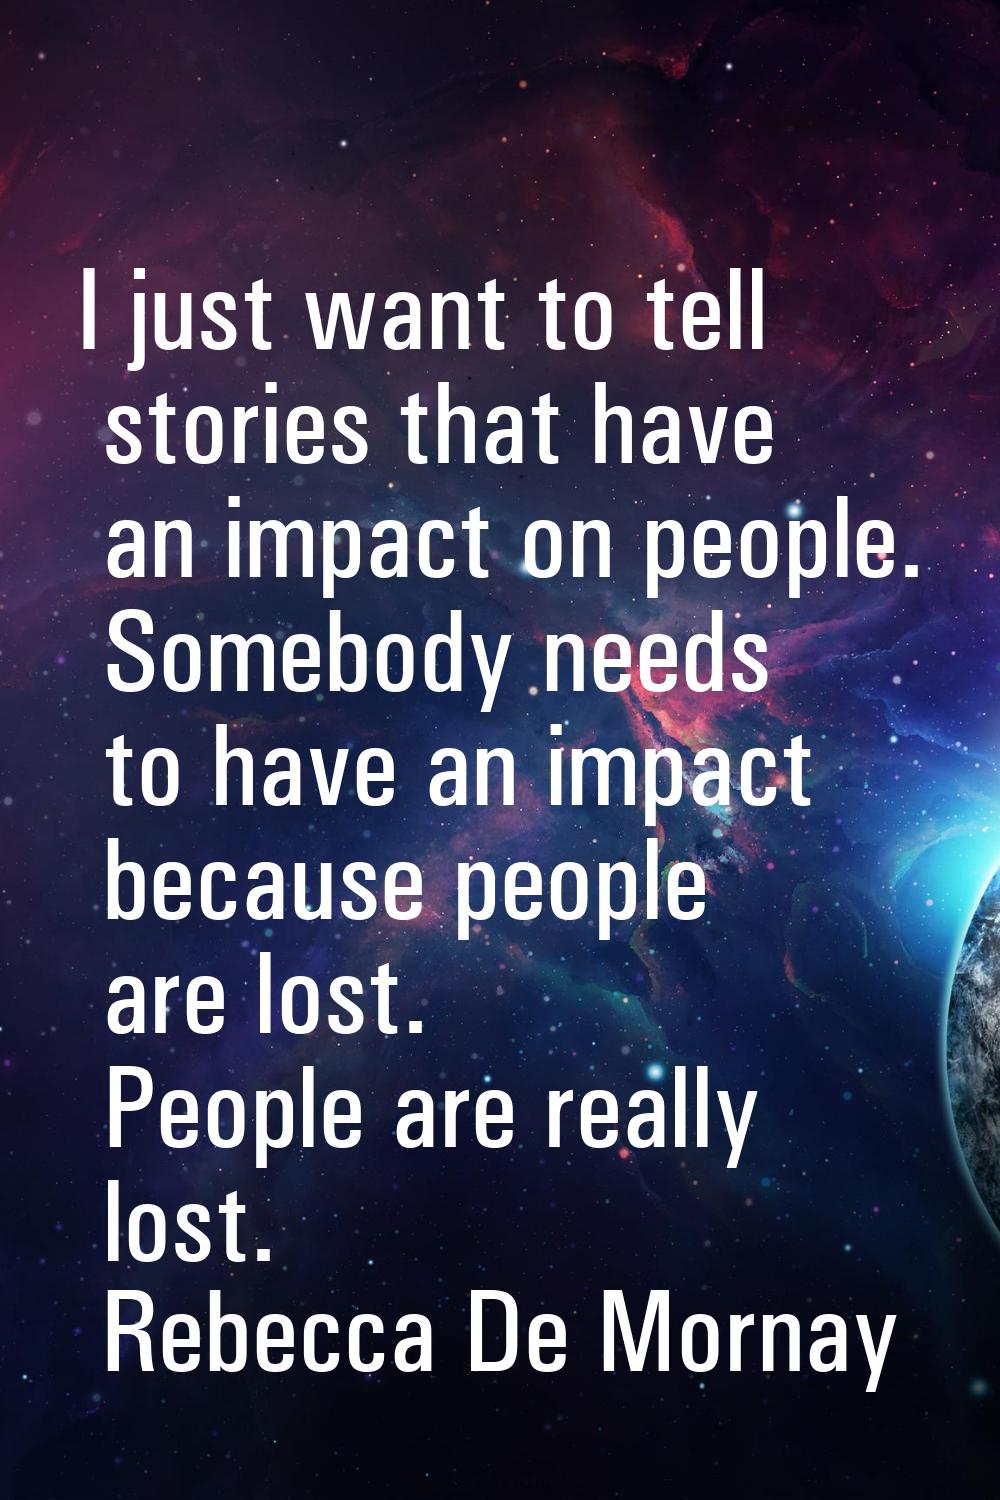 I just want to tell stories that have an impact on people. Somebody needs to have an impact because